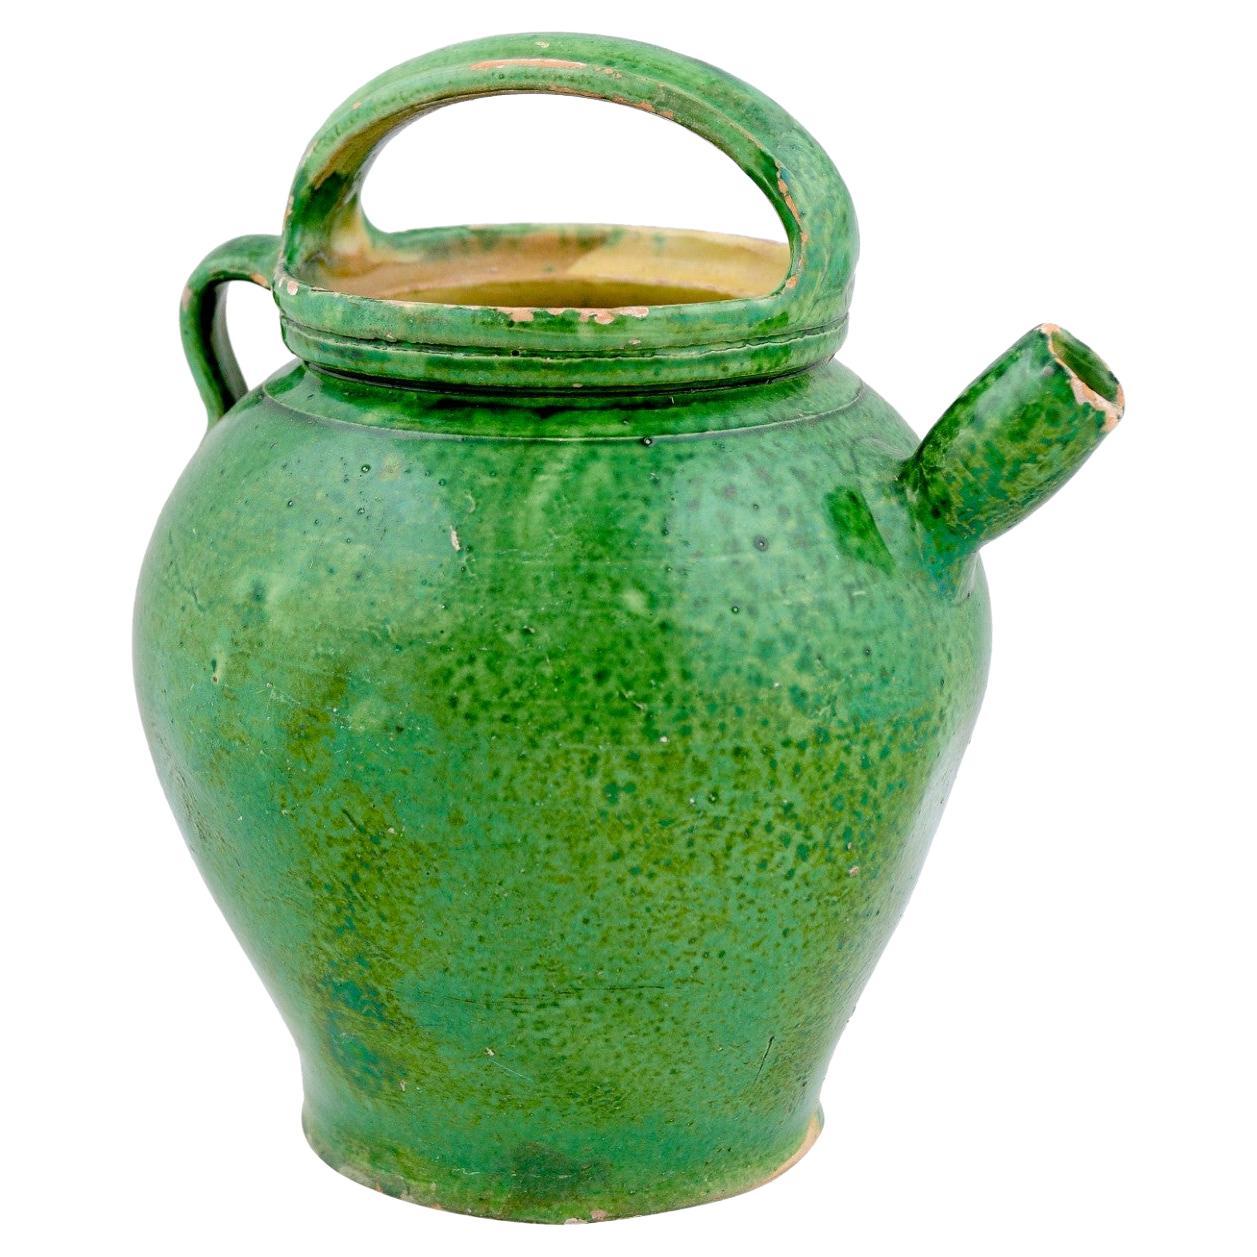 French Provincial 19th Century Green Glazed Olive Oil Jug with Weathered Patina